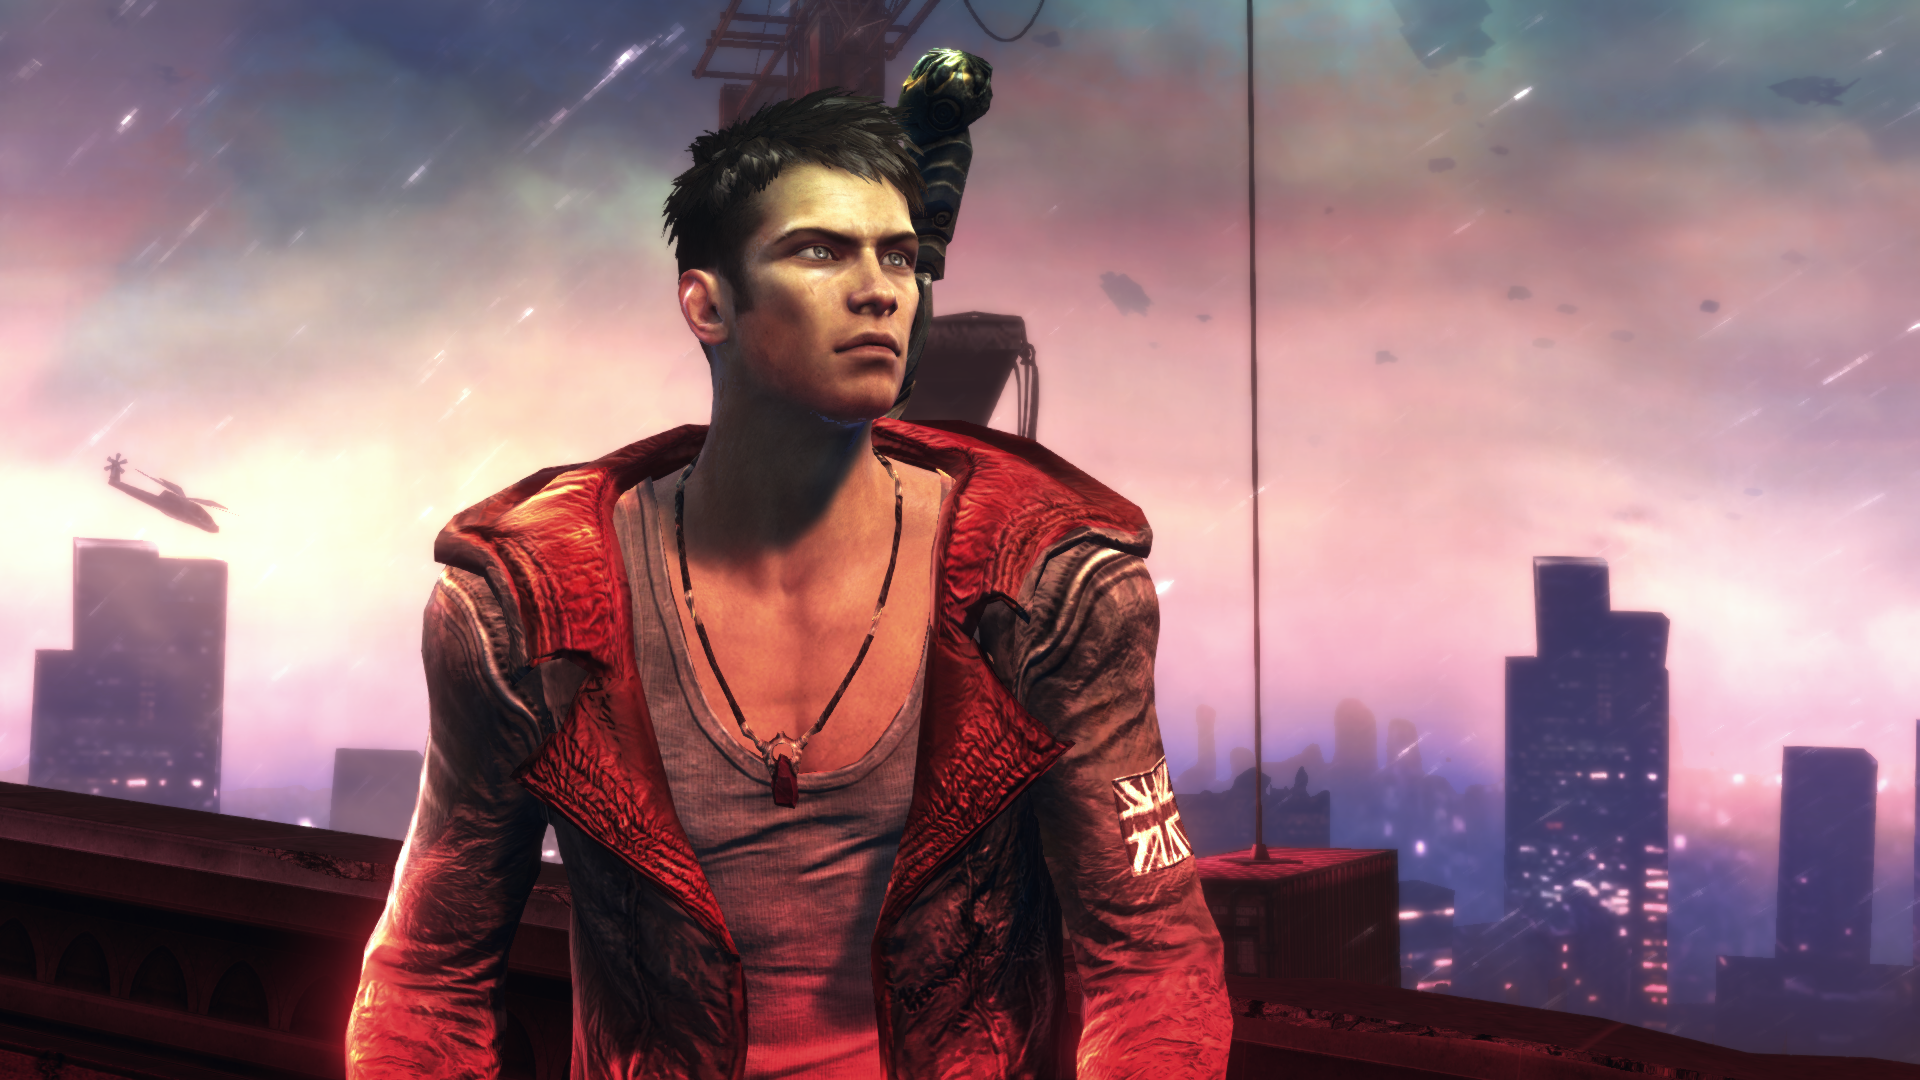 The role of the grotesque and Dante's limbo (DmC: Devil May Cry